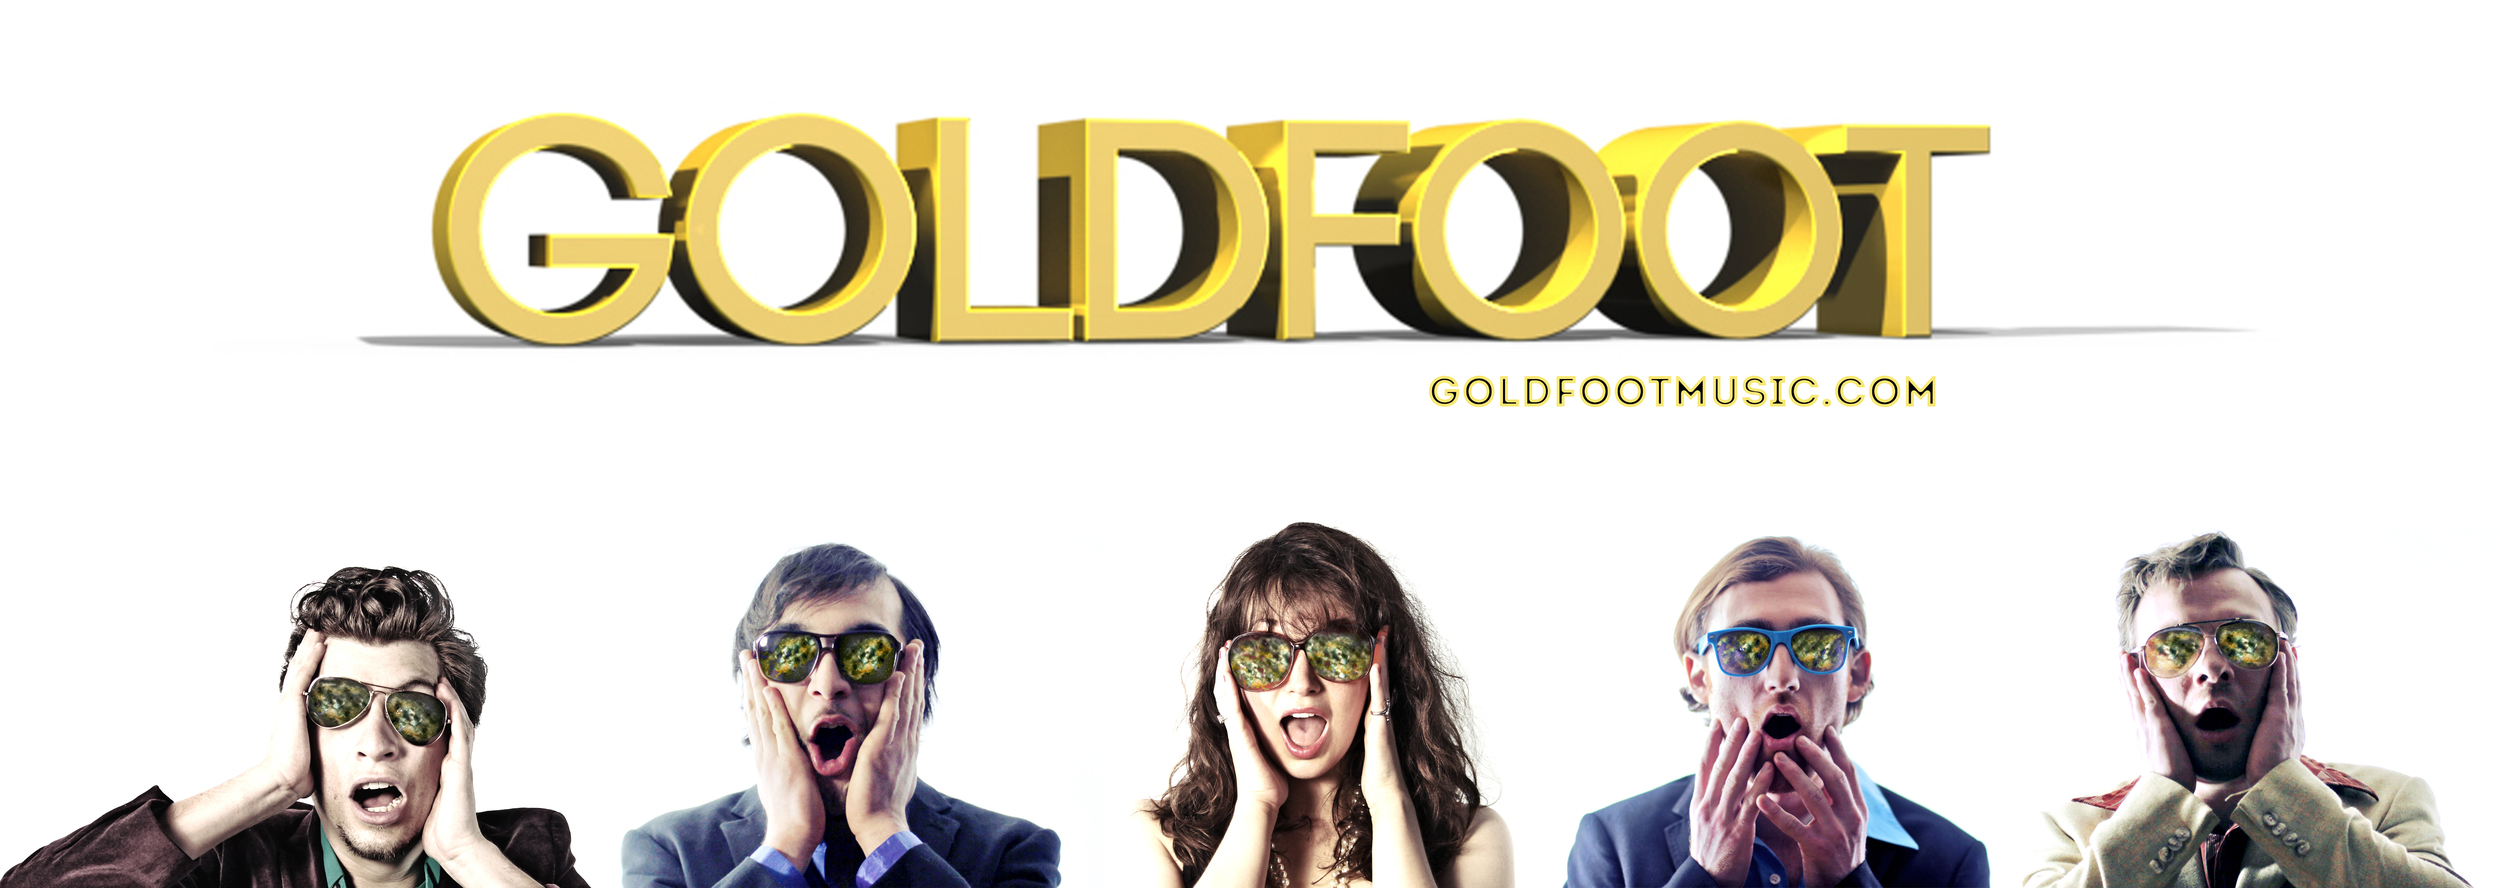 GoldFoot Facebook Cover Photo